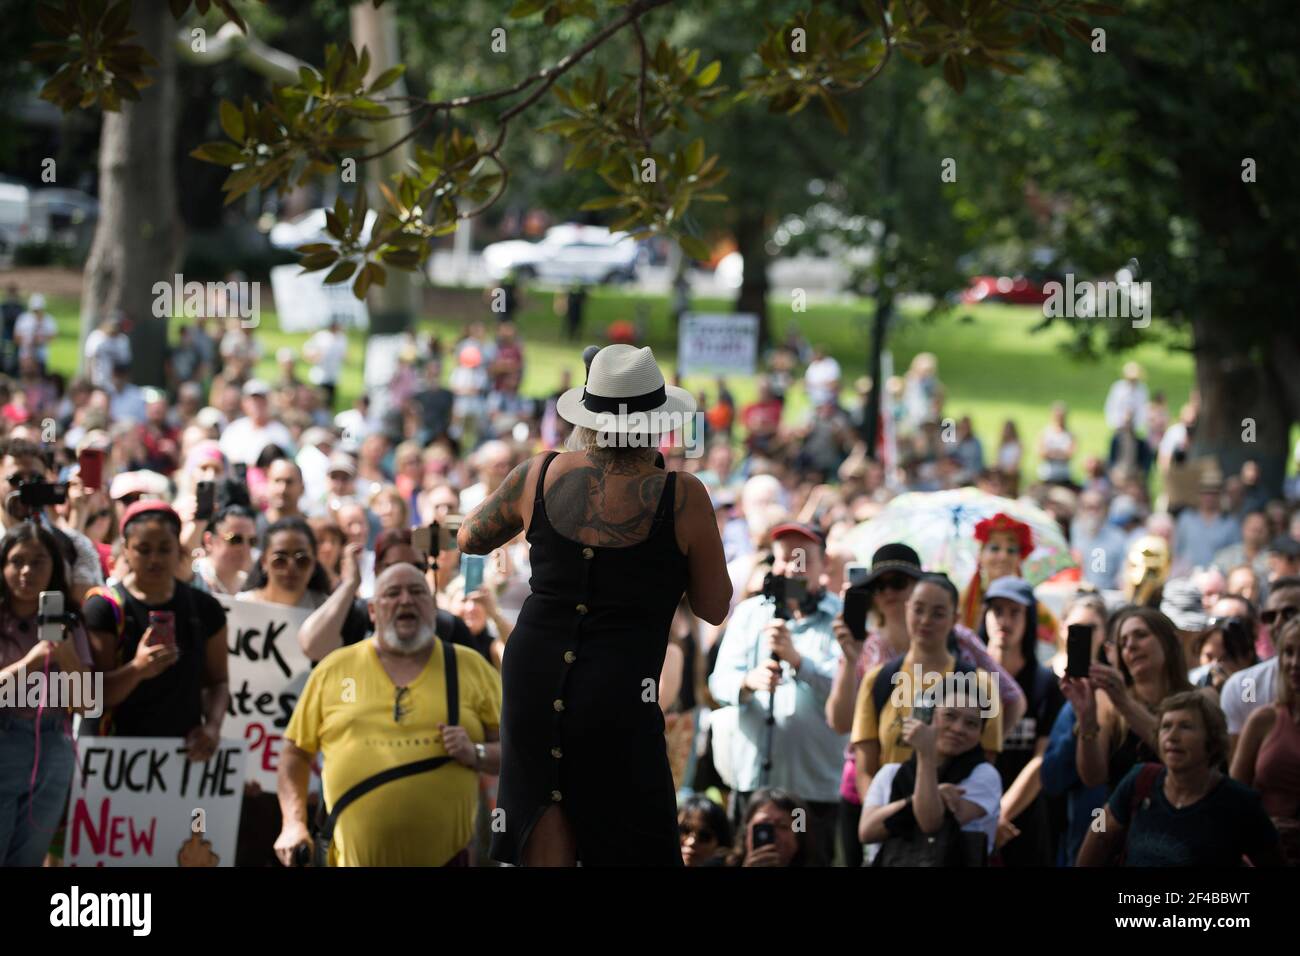 Melbourne, Australia 20 March 2021, A speaker and the crowd at a freedom rally in Flagstaff Gardens. A demonstration as part of a planned 'World Wide Rally for Freedom' that was organised to calling for freedom of choice, speech and movement. Credit: Michael Currie/Alamy Live News Stock Photo